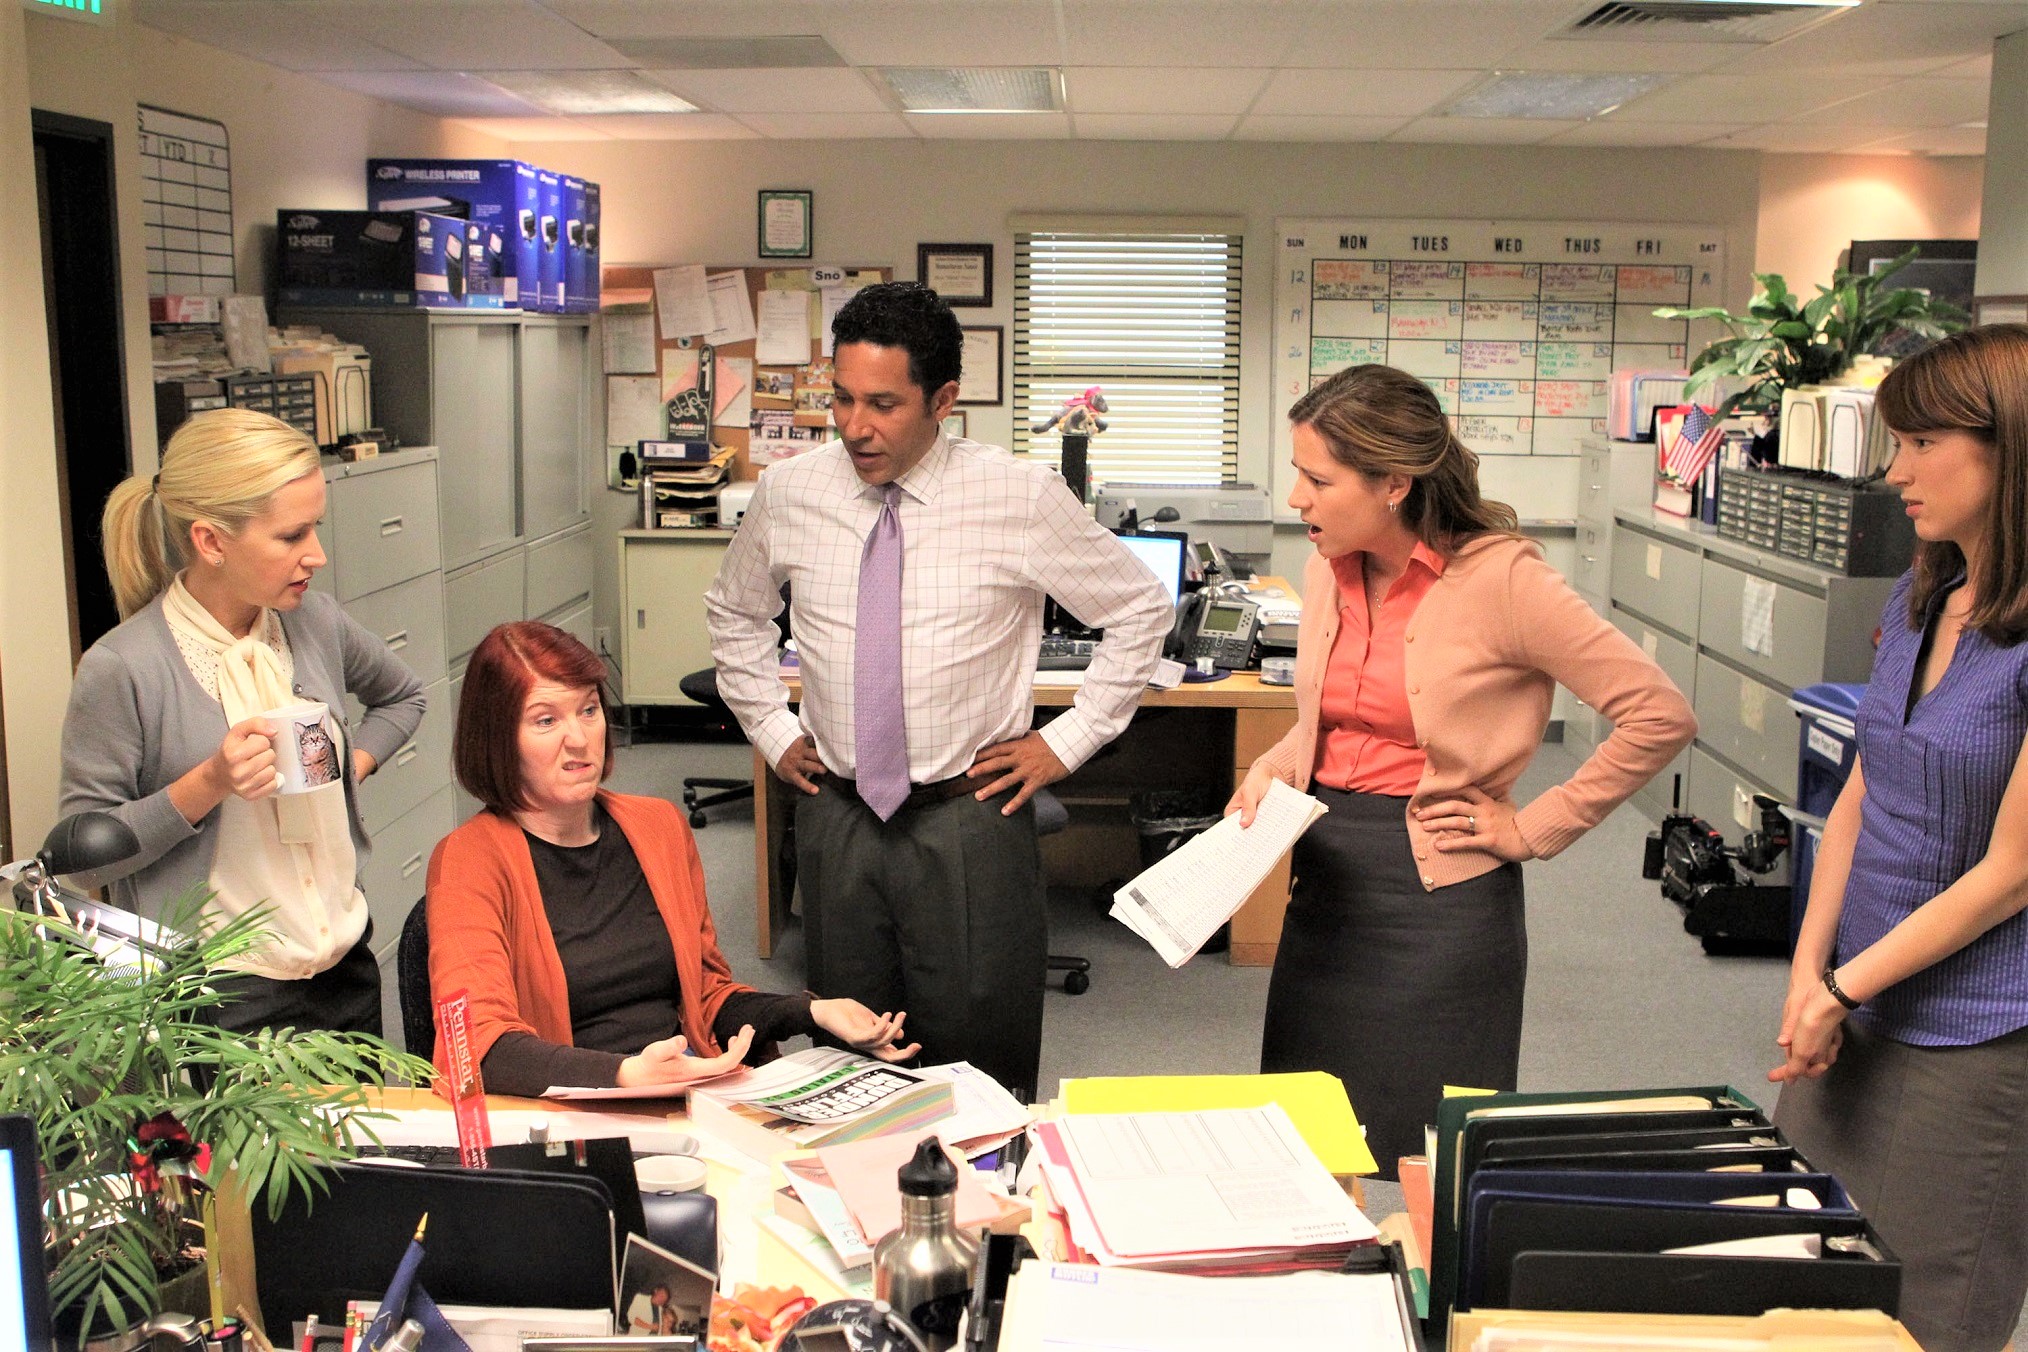 The Office': Cast & Creator Reflect on Moments That Make Them Laugh (VIDEO)